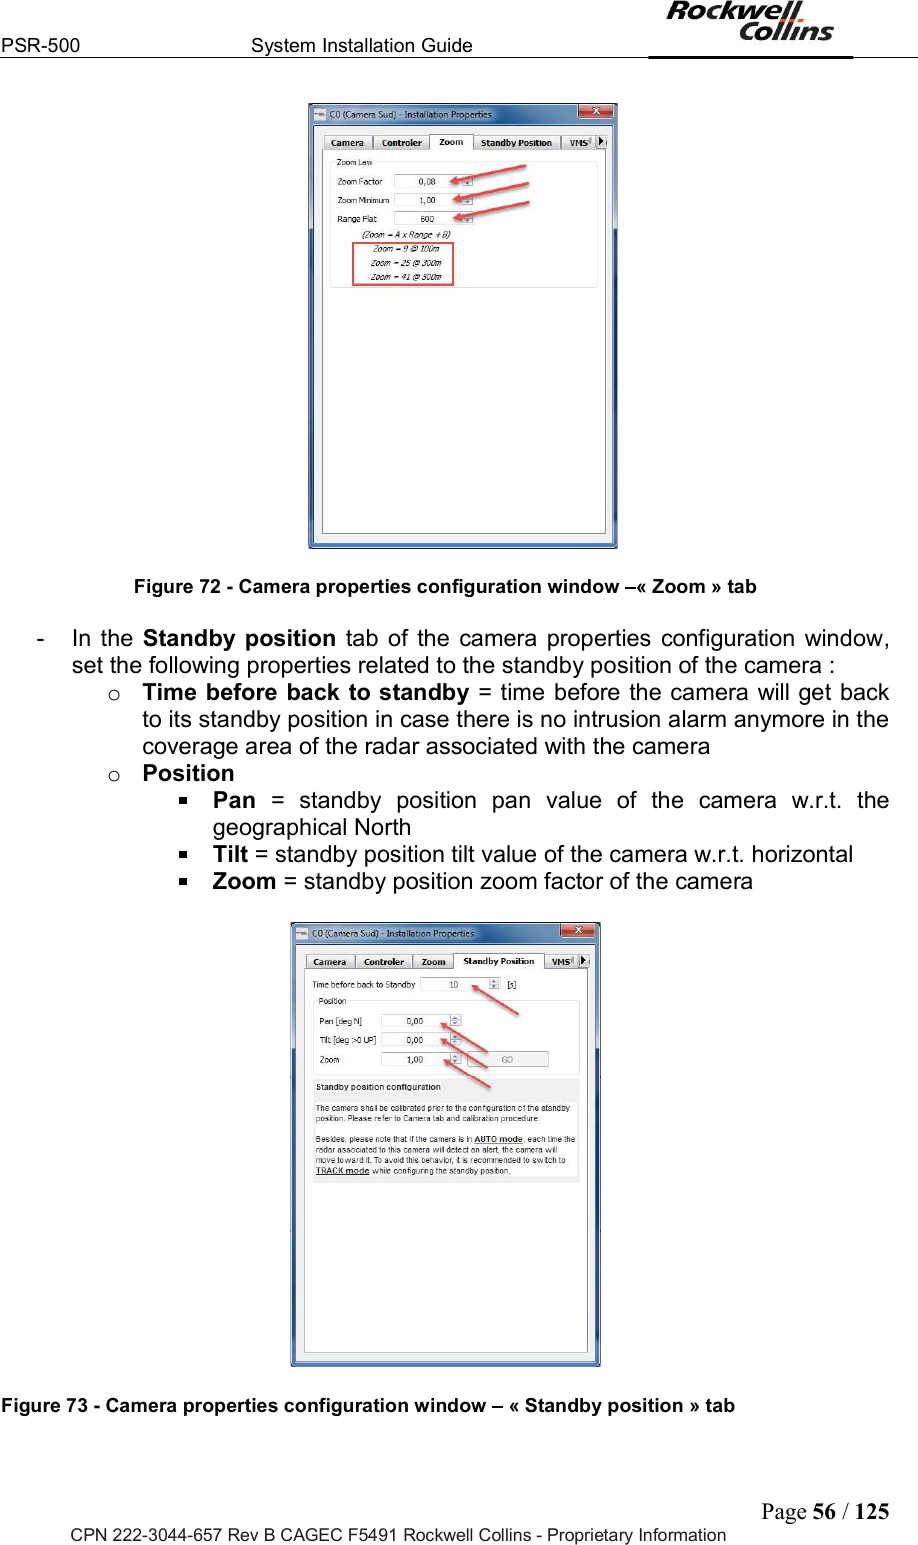 PSR-500  System Installation Guide  Page 56 / 125 CPN 222-3044-657 Rev B CAGEC F5491 Rockwell Collins - Proprietary Information   Figure 72 - Camera properties configuration window  « Zoom » tab  -  In  the  Standby position  tab of  the  camera  properties  configuration  window, set the following properties related to the standby position of the camera :  o Time before back to standby = time before the camera will get back to its standby position in case there is no intrusion alarm anymore in the coverage area of the radar associated with the camera o Position  Pan  =  standby  position  pan  value  of  the  camera  w.r.t.  the geographical North  Tilt = standby position tilt value of the camera w.r.t. horizontal  Zoom = standby position zoom factor of the camera     Figure 73 - Camera properties configuration window   « Standby position » tab  